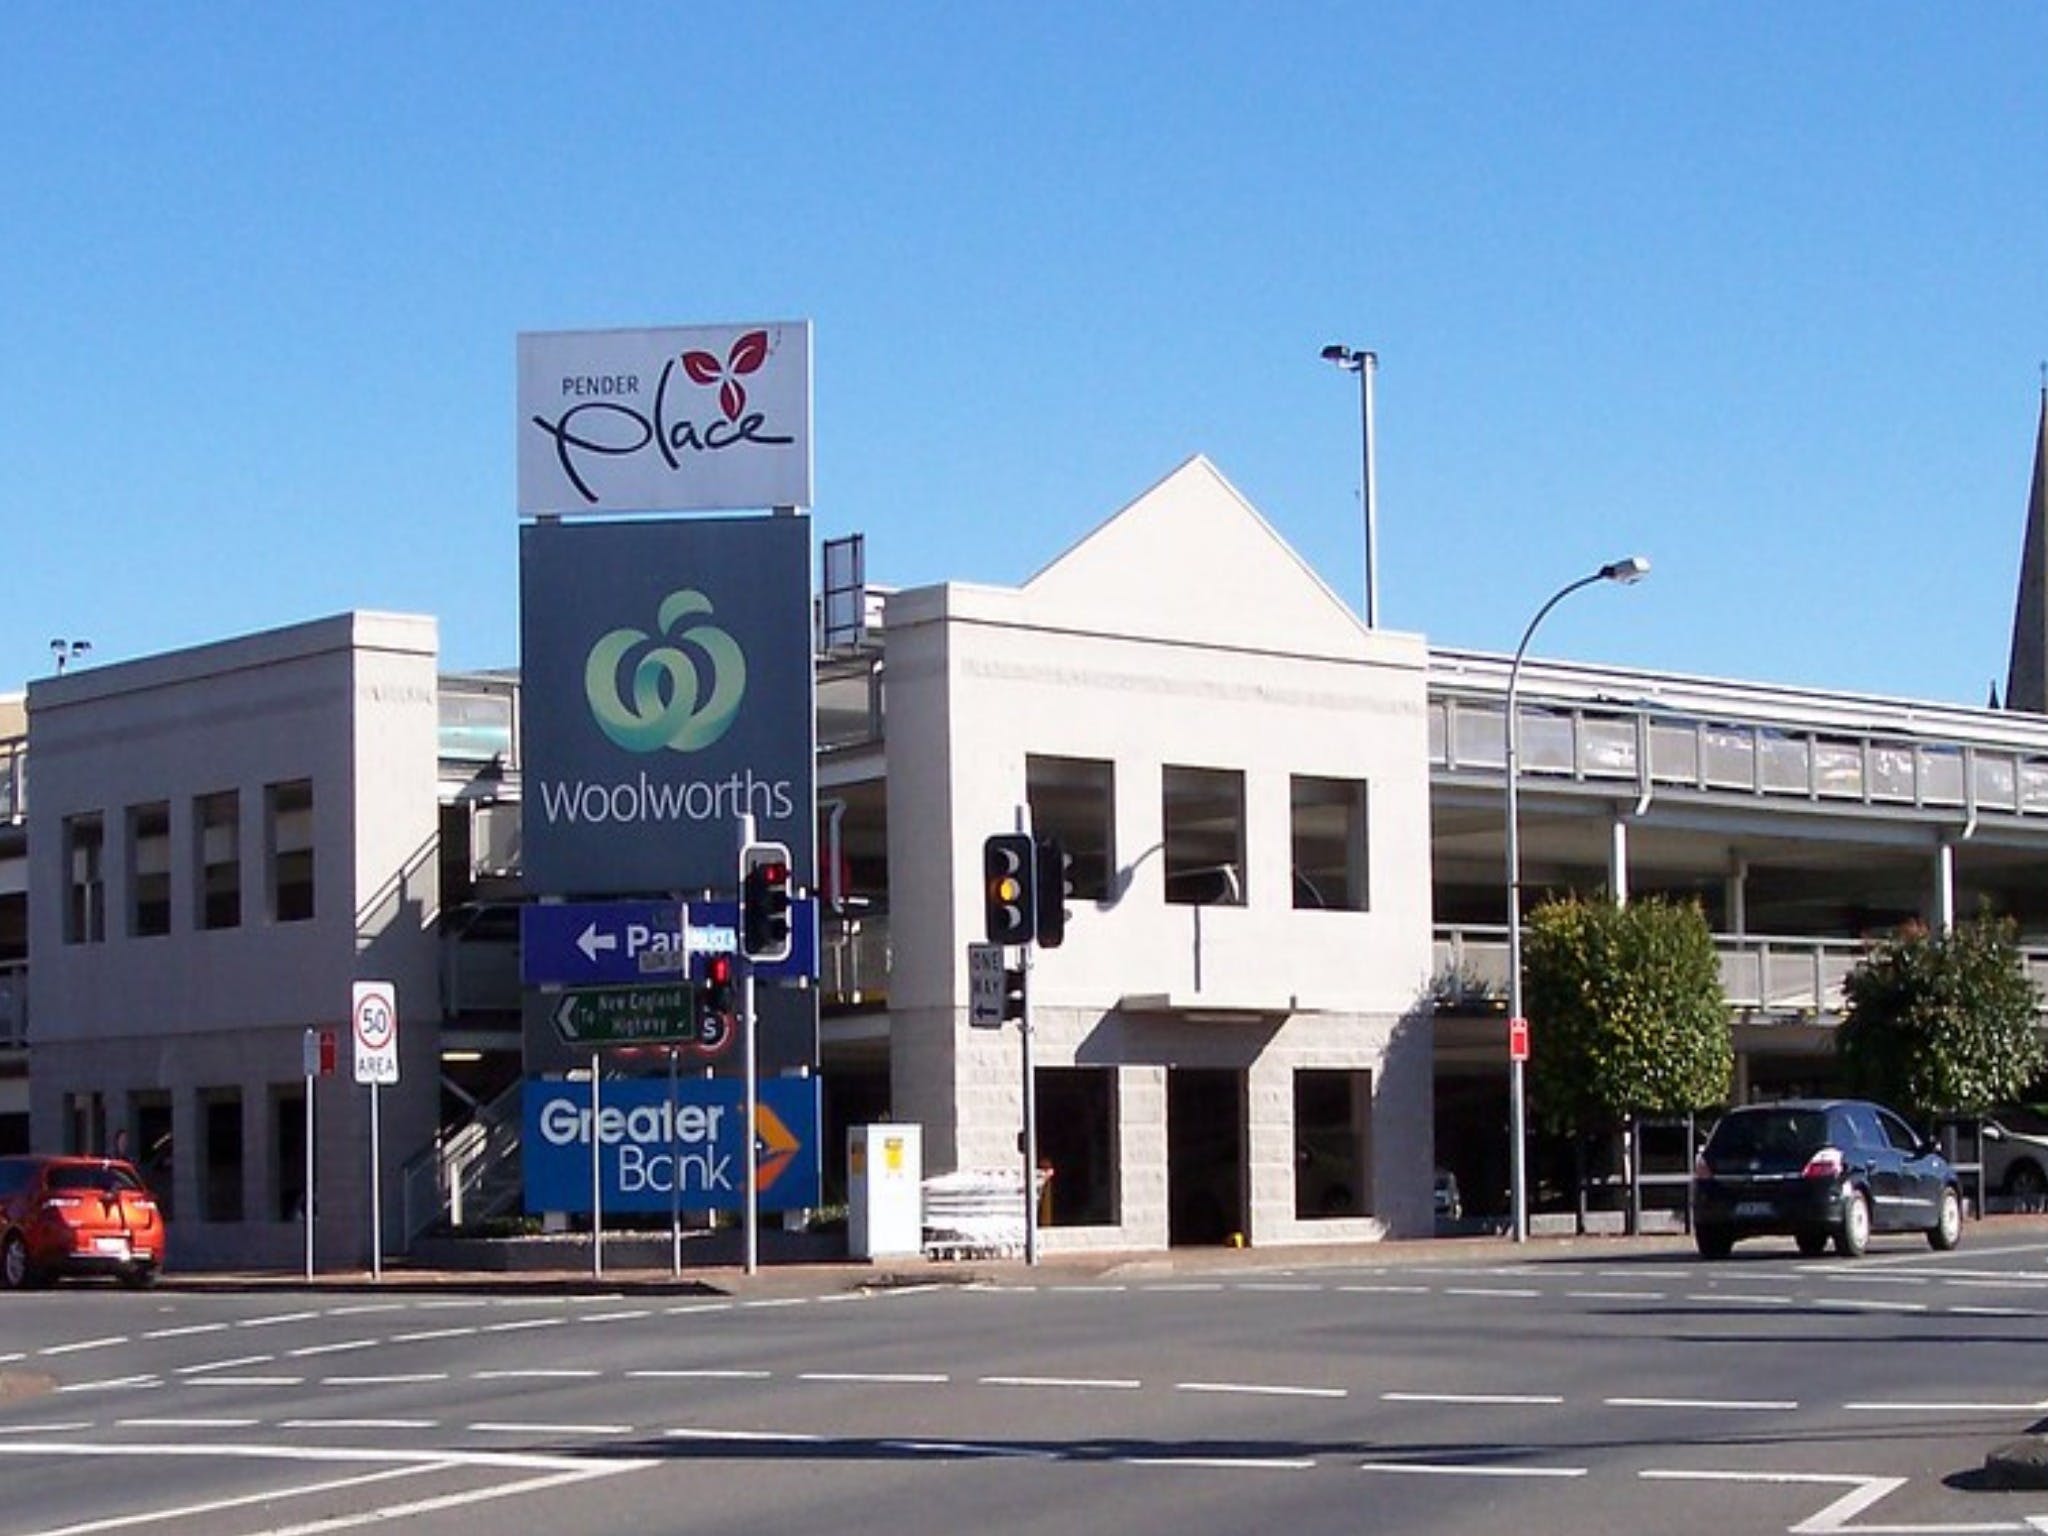 Pender Place Shopping Centre - WA Accommodation